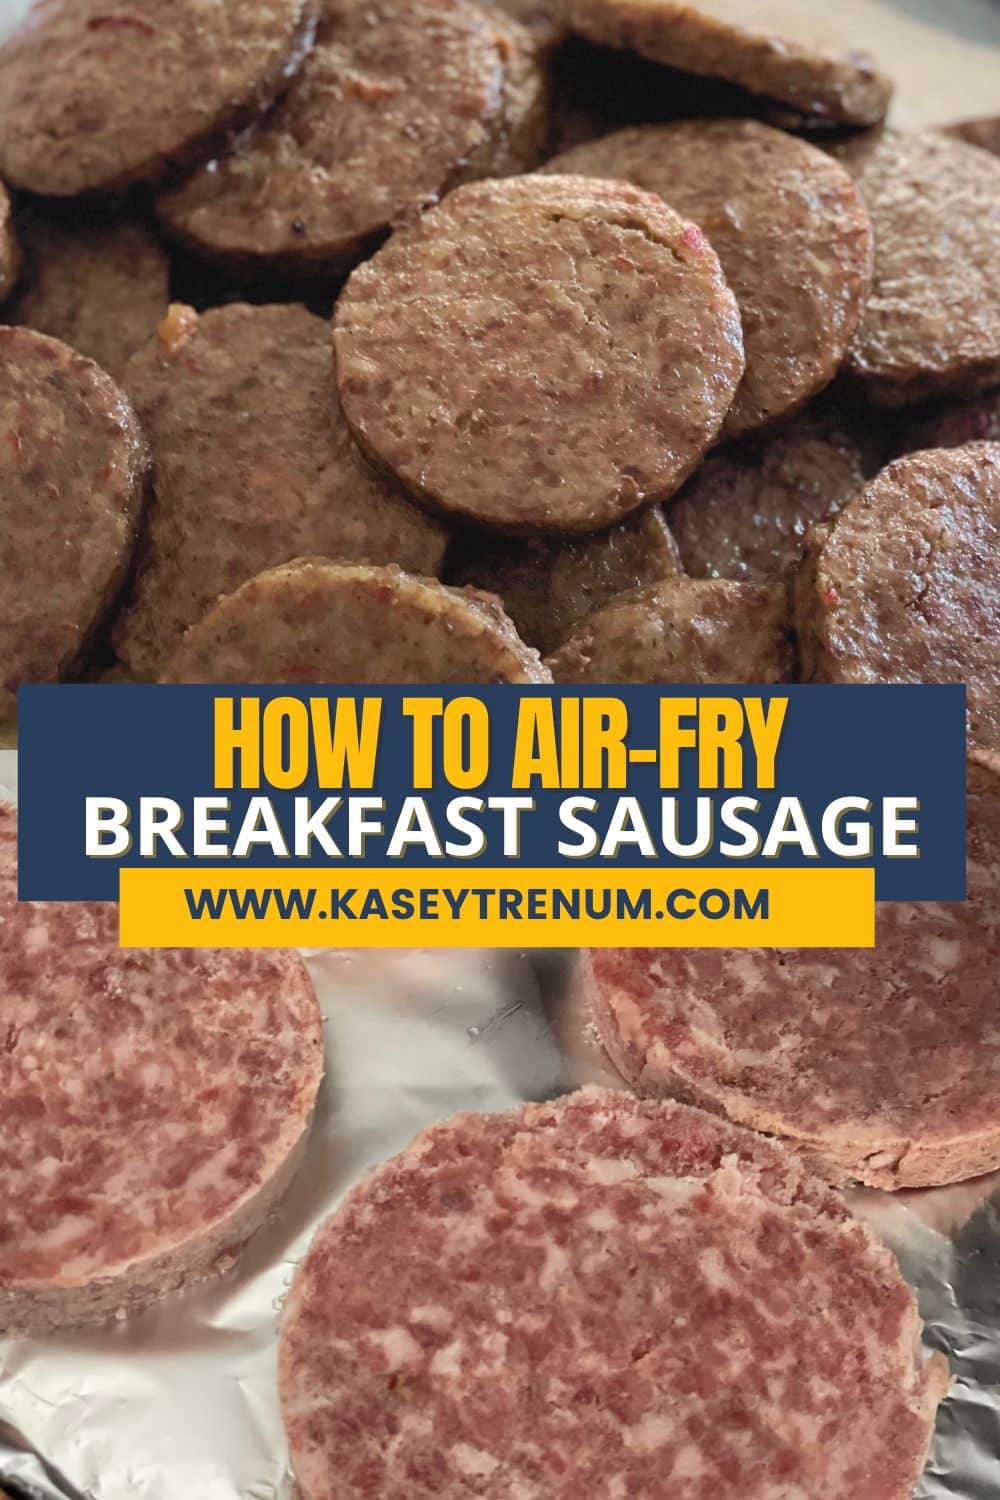 Split screen overhead image showing raw sausage patties arranged on an air fryer tray on the bottom half and a pile of cooked sausage patties on the top half, with the text "How to Air Fry Sausage kaseytrenum.com" displayed in the center in yellow, blue, and white.